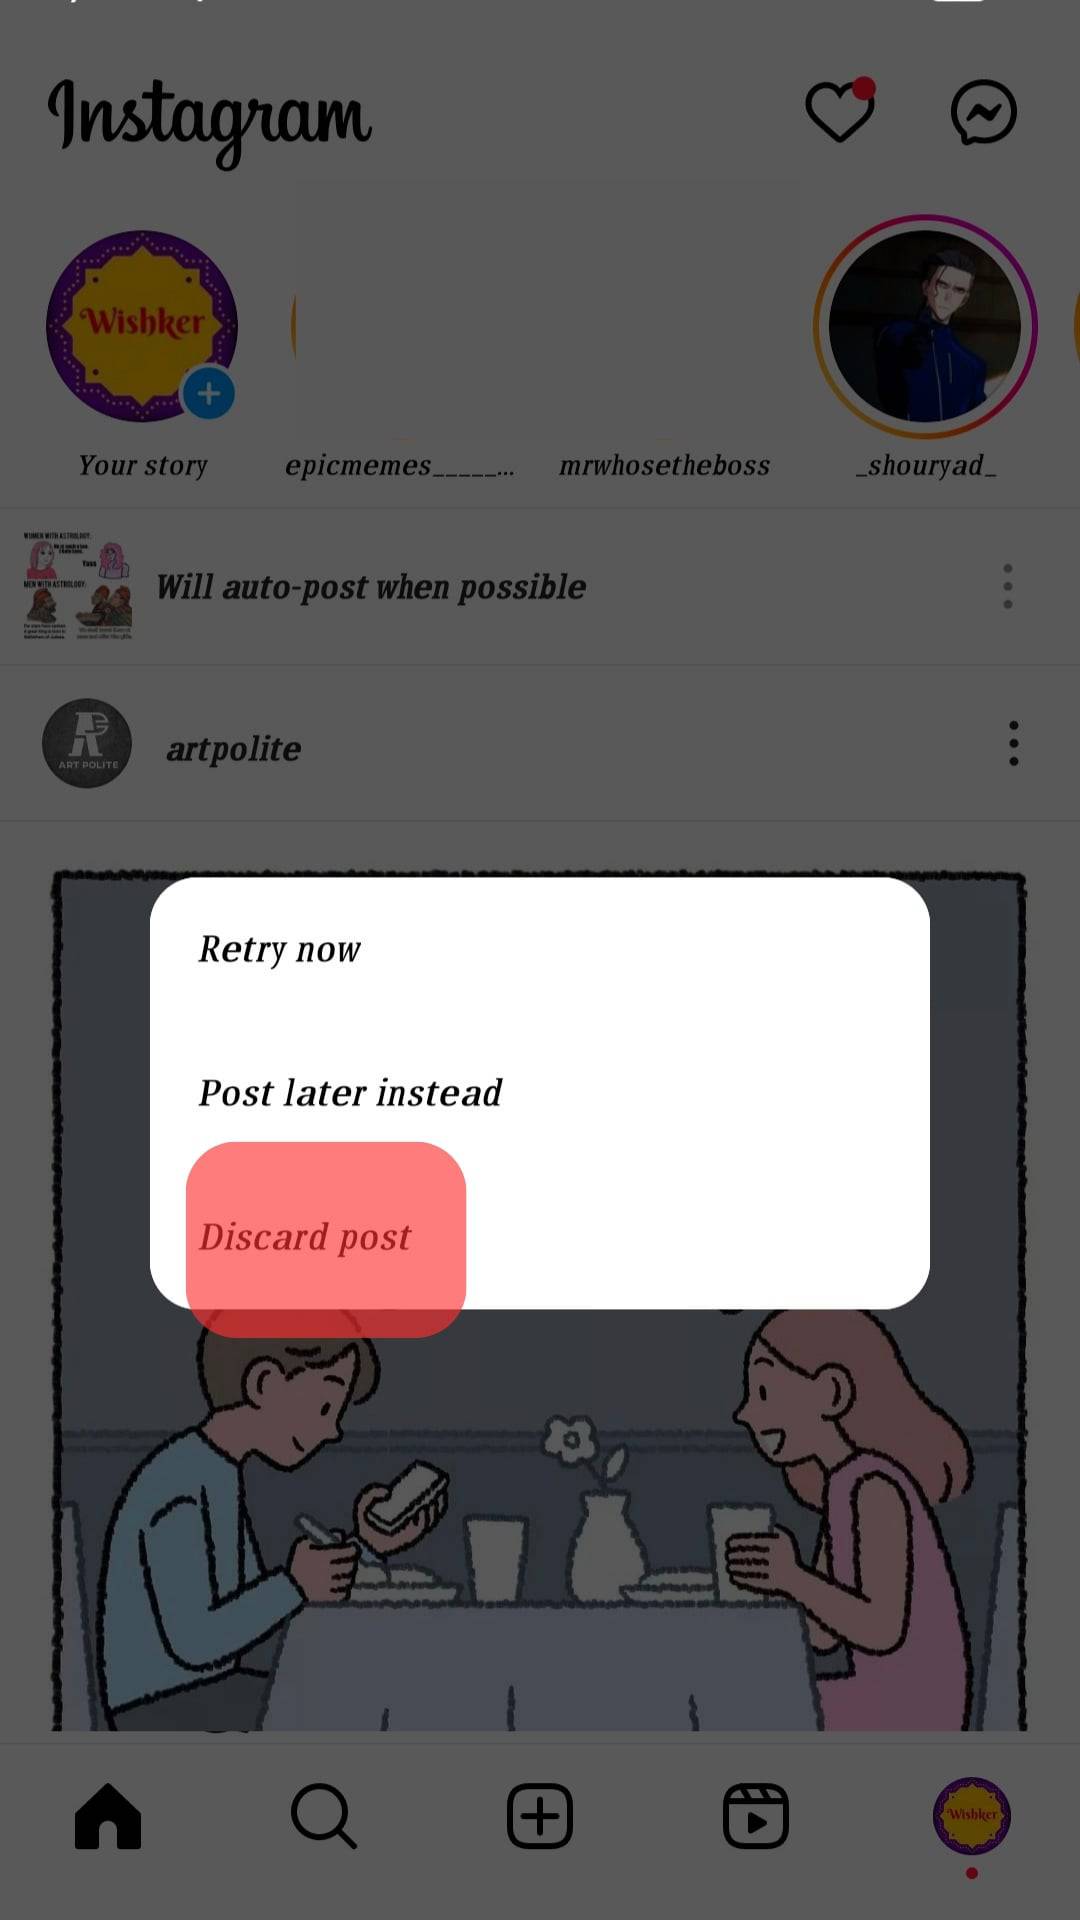 Click The Discard Post Option.